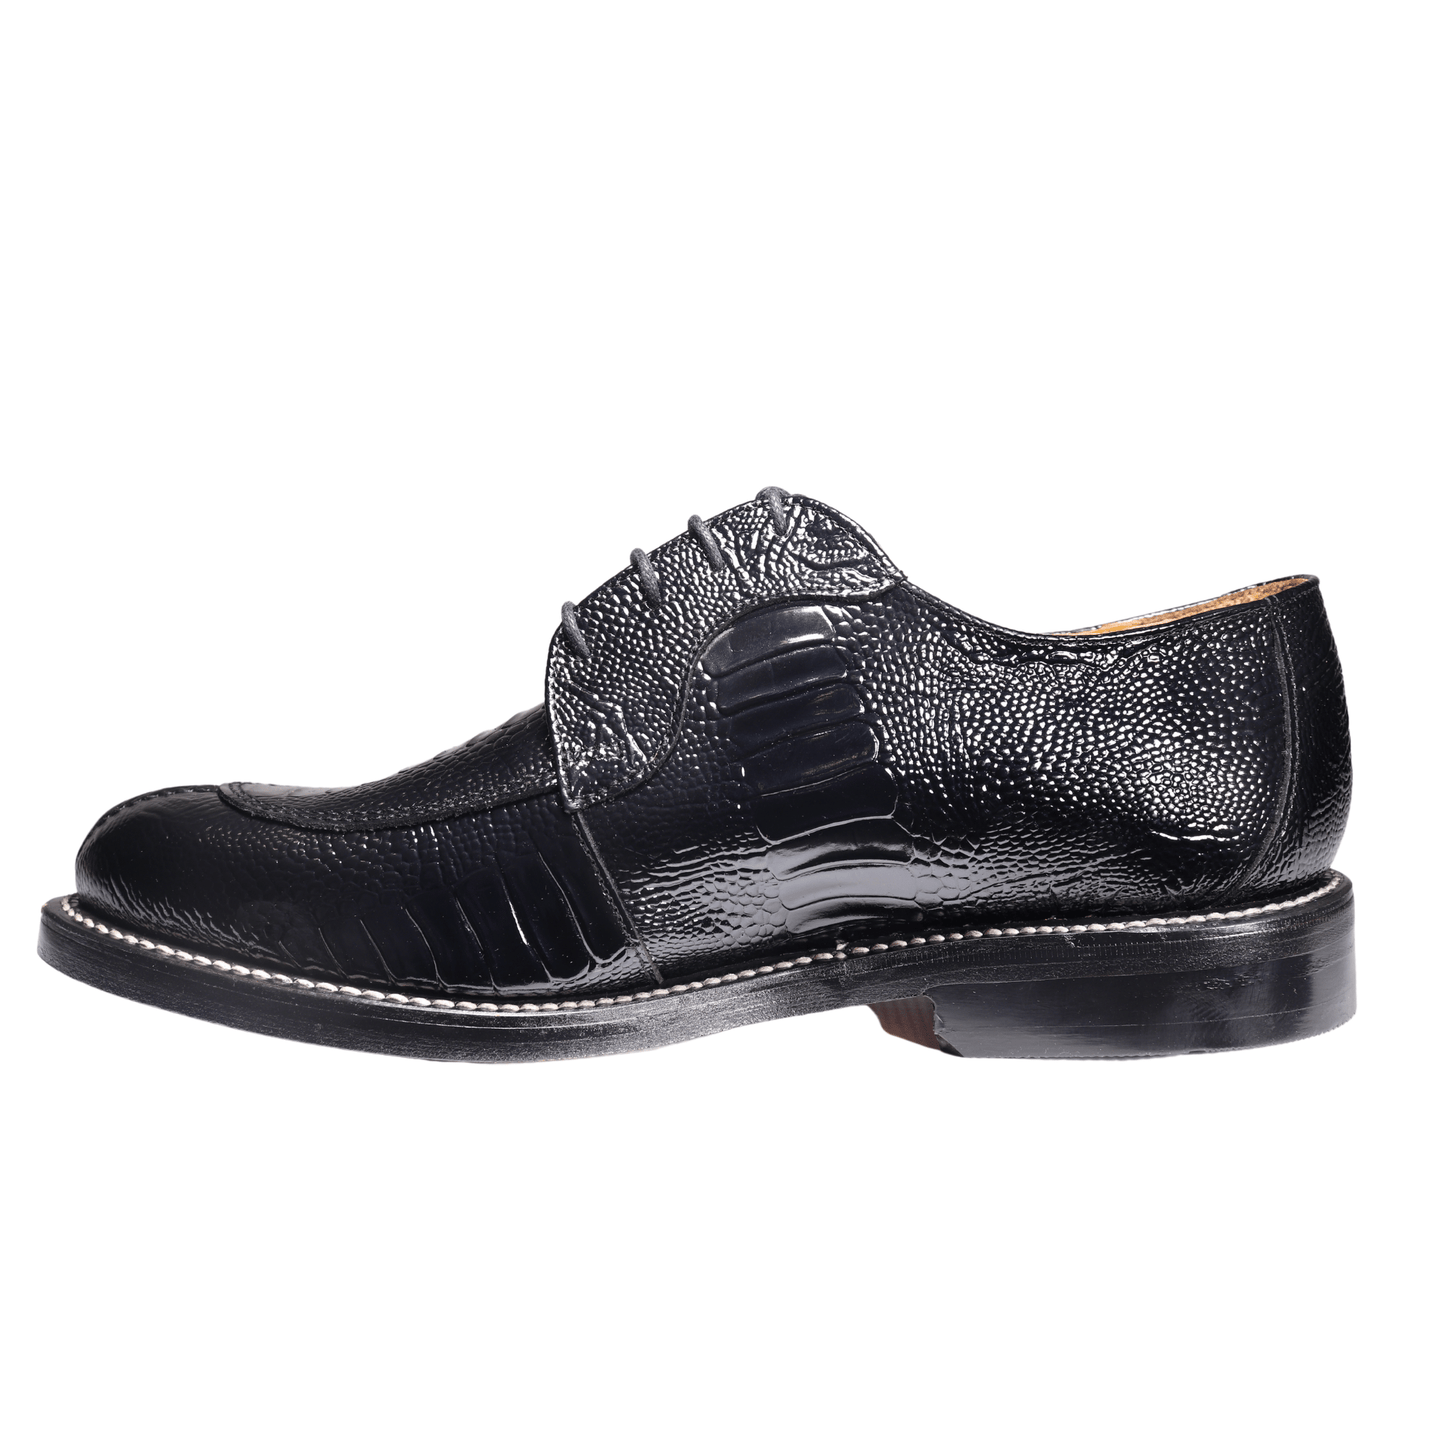 Johnston & Murphy Black Welted Lace-up